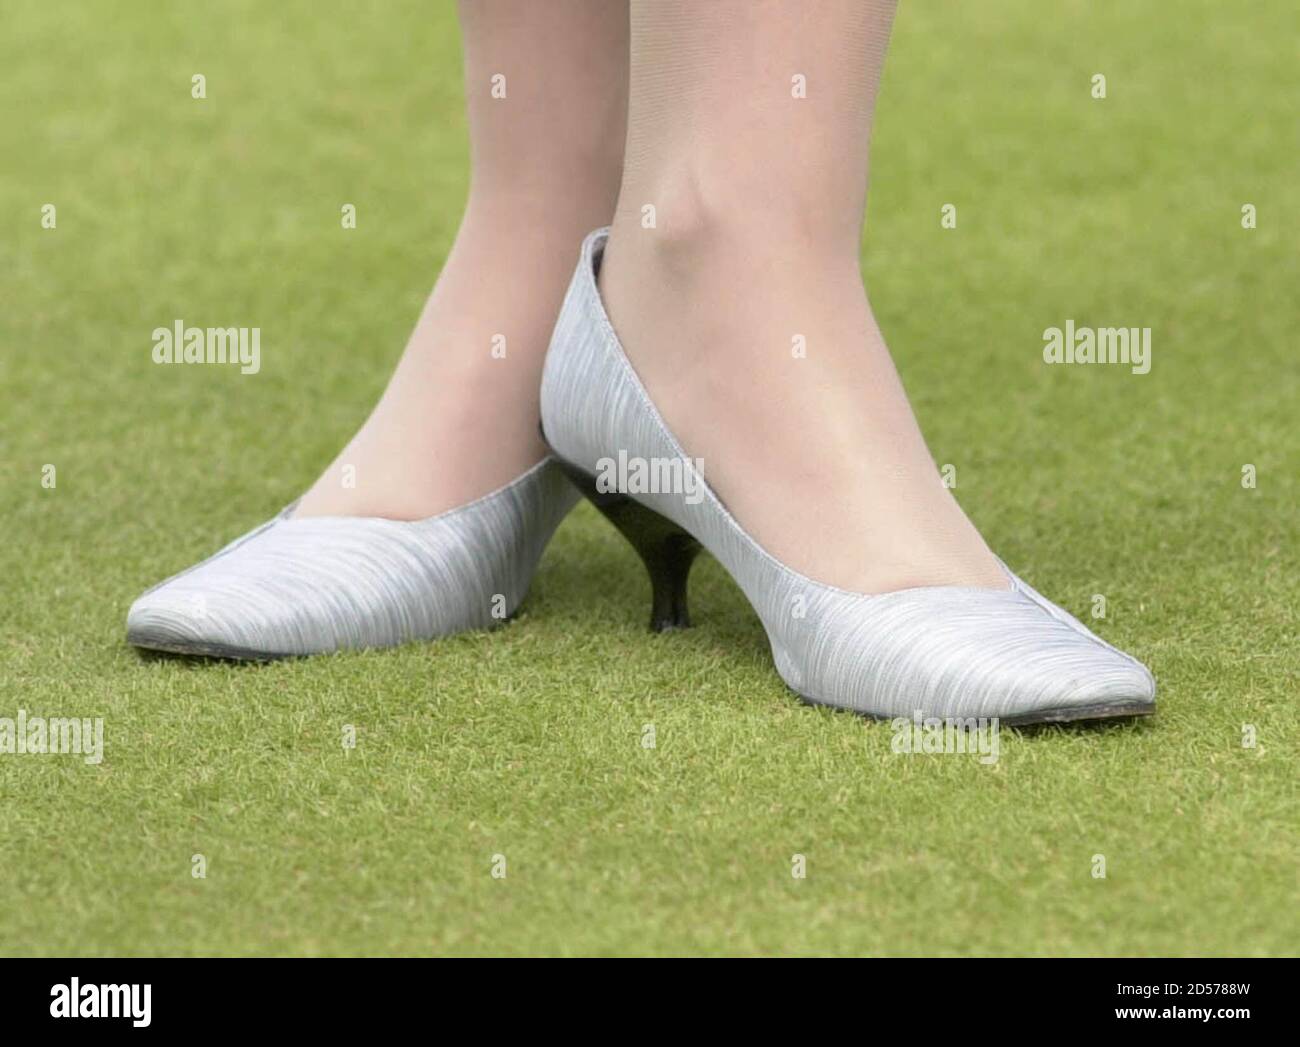 Sophie, The Countess of Wessex wears inappropriate shoes she tries her hand at bowling at Taunton Deane Bowling Club July 8. The Duke and Duchess of Wessex opened the new bowling green.  PS Stock Photo